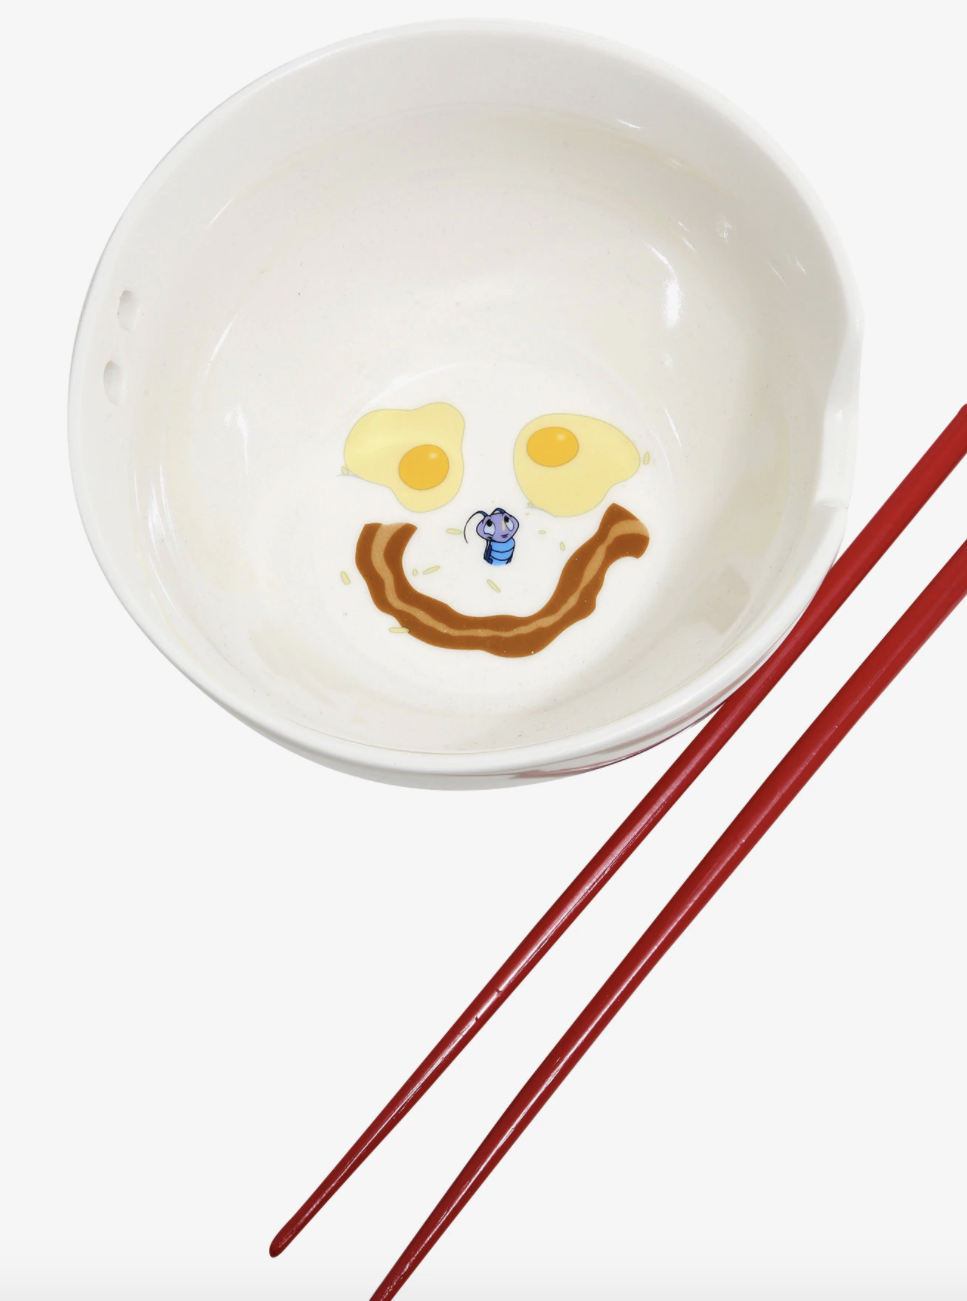 a bowl with the eggs and smile made of bacon drawn on the inside in addition to kri-kee from the movie mulan alongside red chopsticks